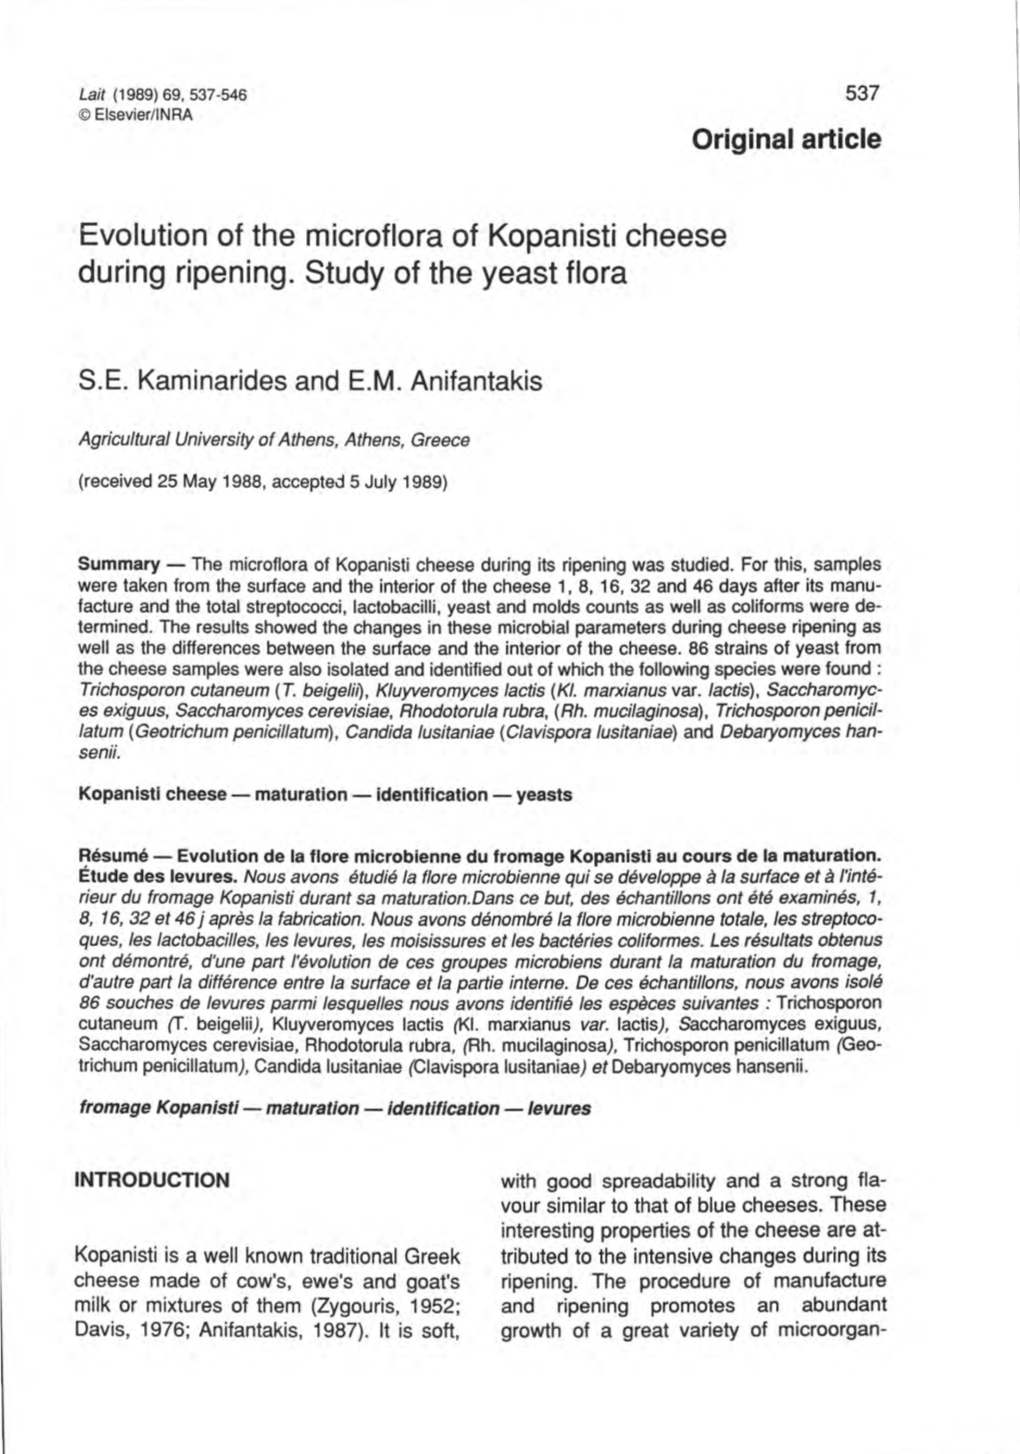 Evolution of the Microflora of Kopanisti Cheese During Ripening. Study Of